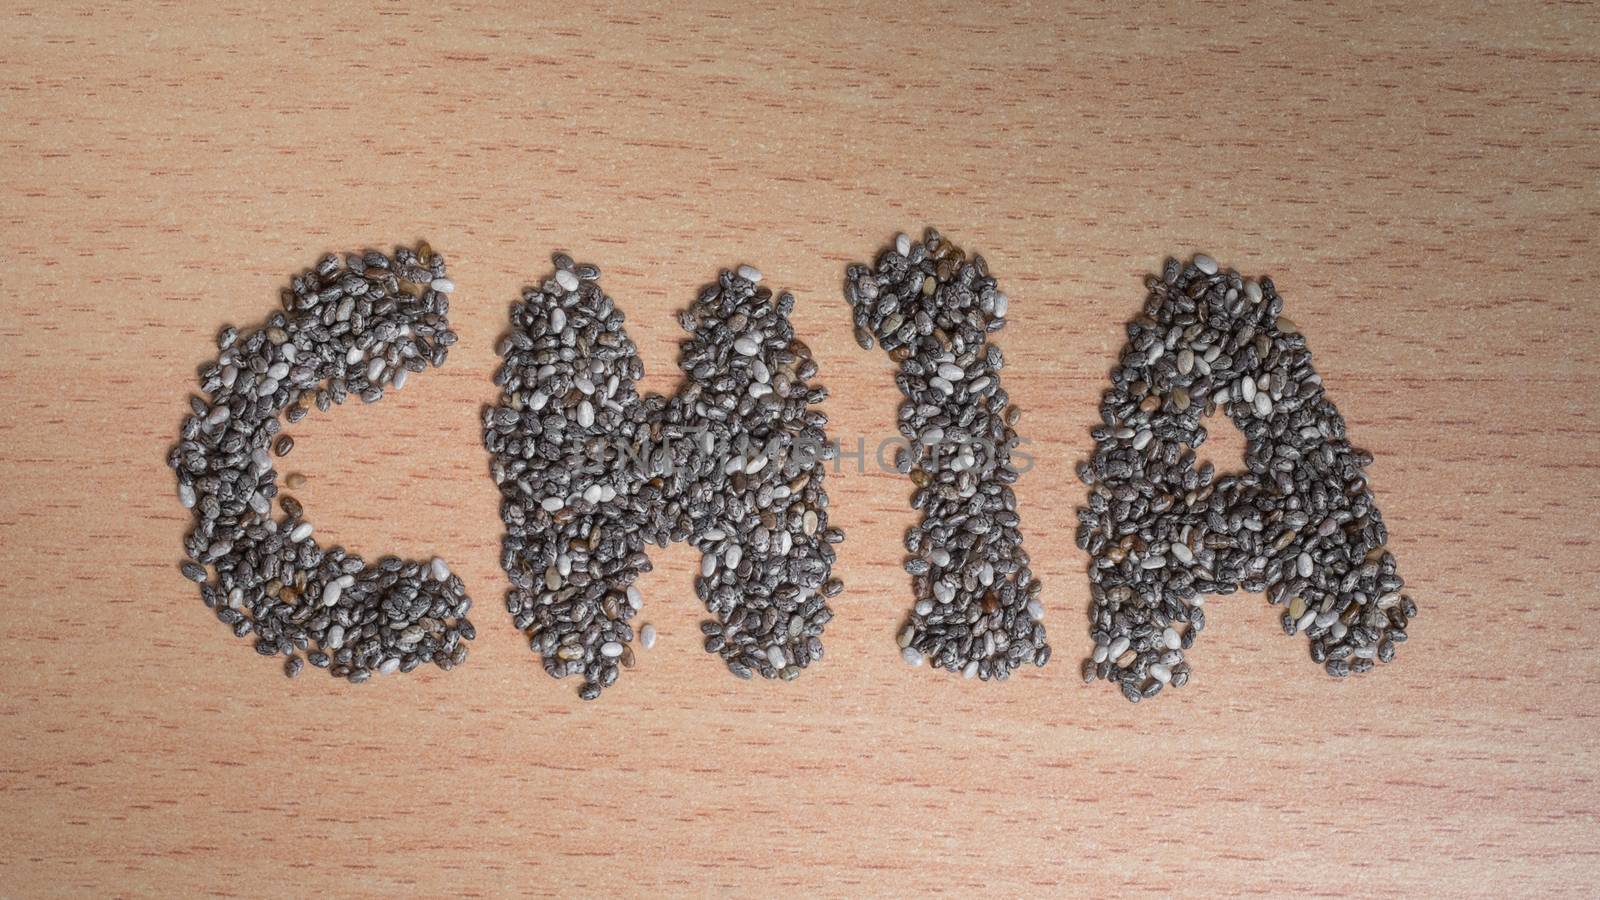 chia word made from chia seeds on wooden plate by zneb076